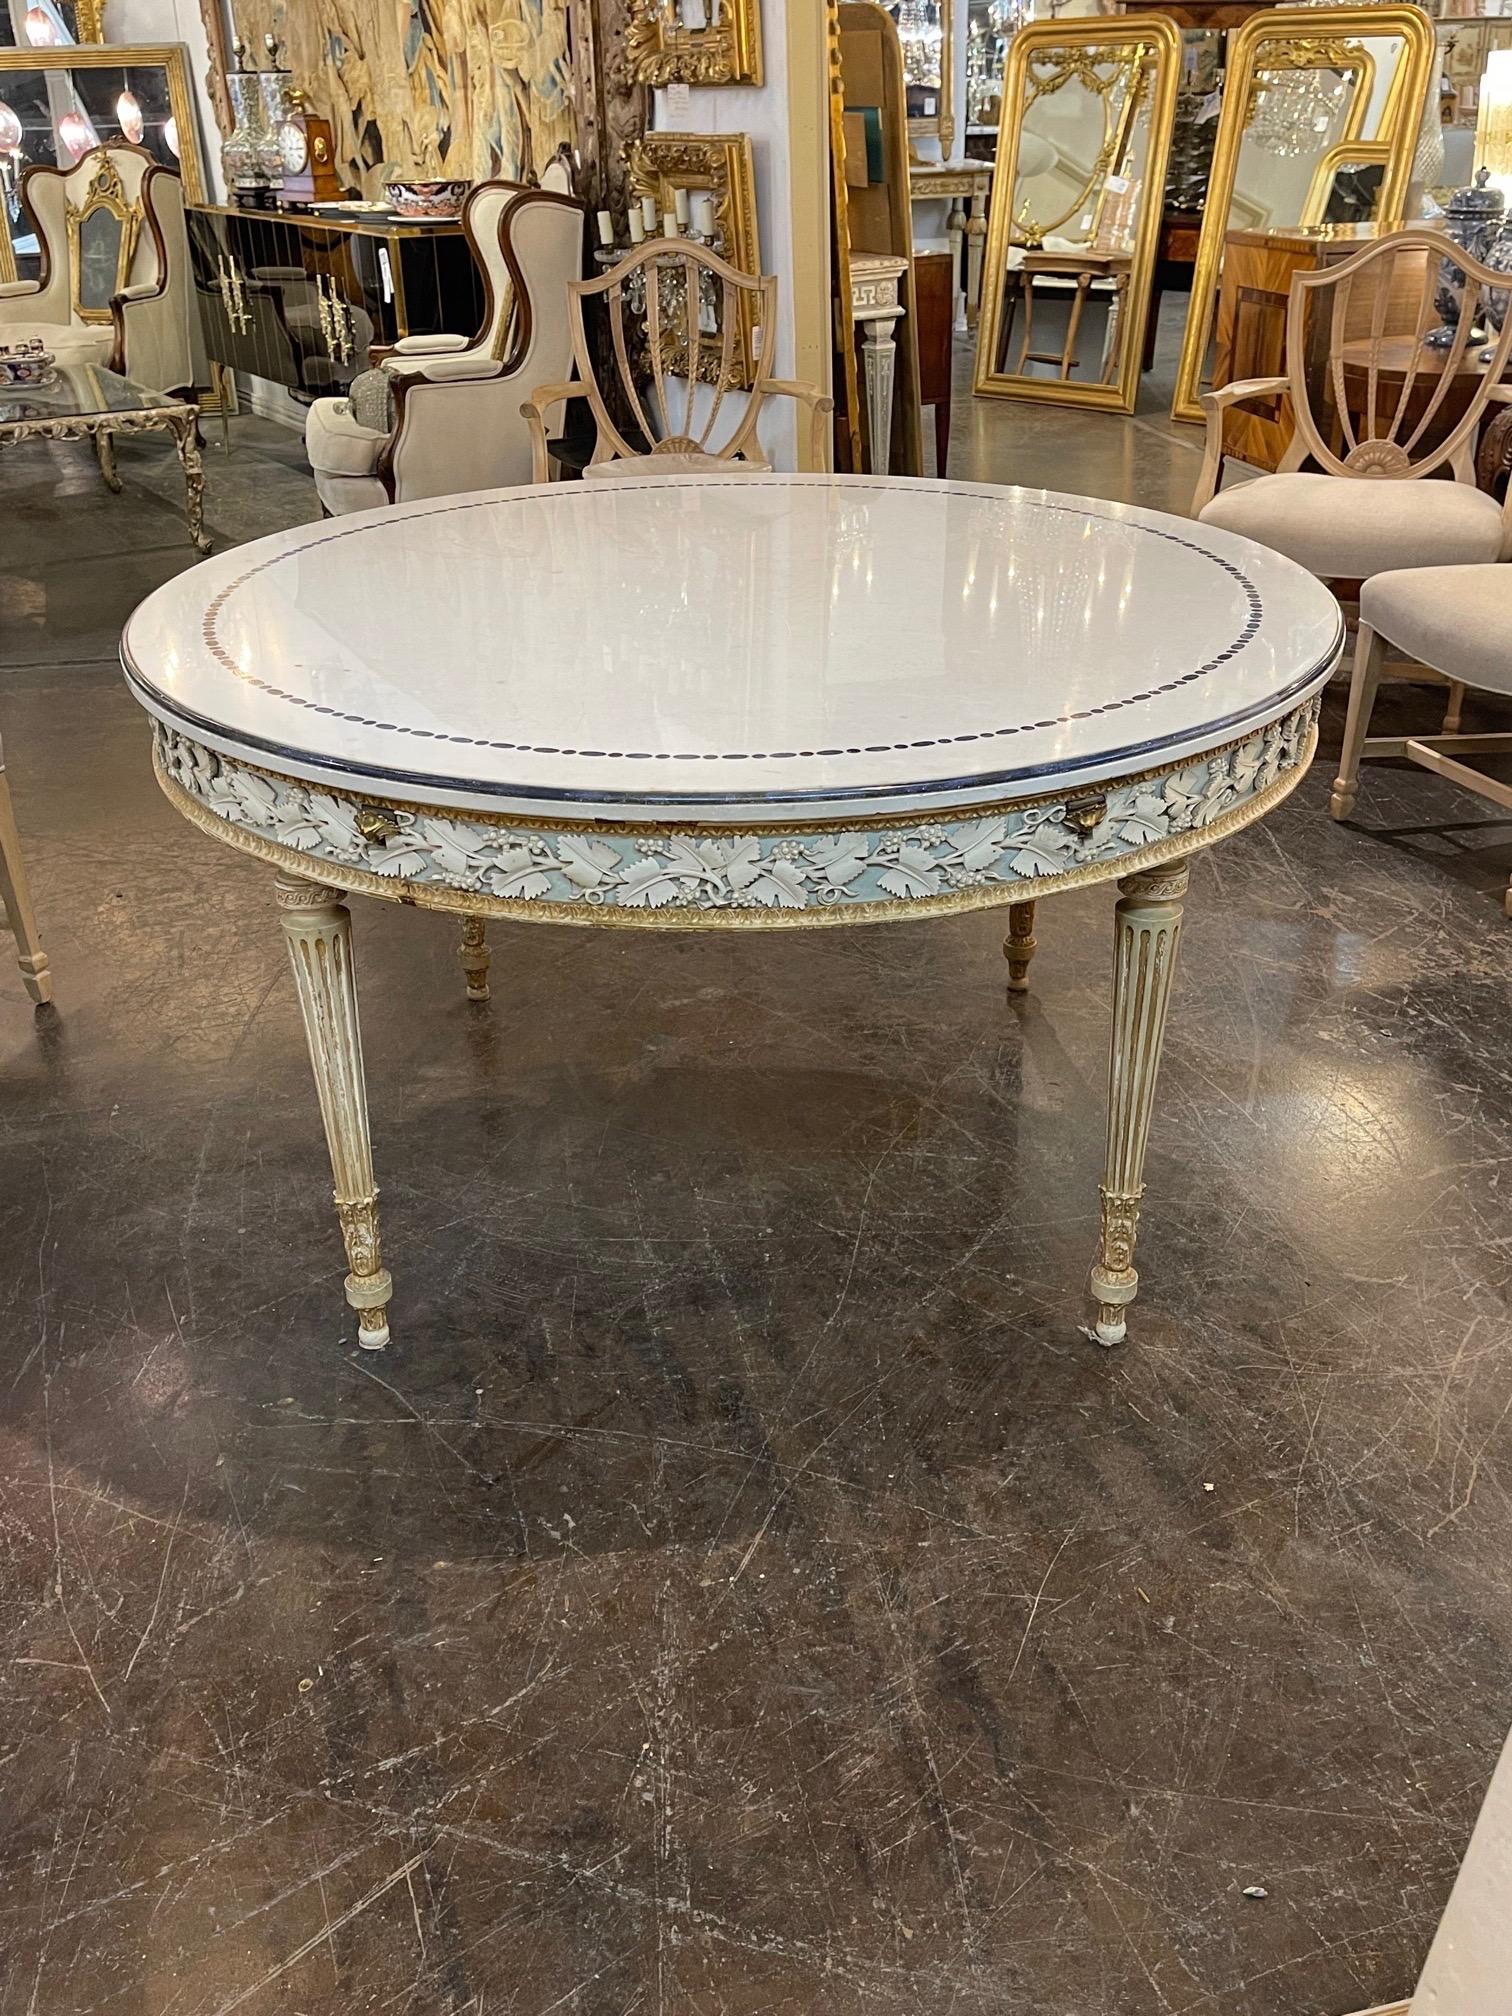 Exceptional 19th century Italian carved and painted center table with inlaid marble top. Beautiful carved floral details on the outer border and a lovely white marble top. Very nice bronze fluted legs as well. Stunning!